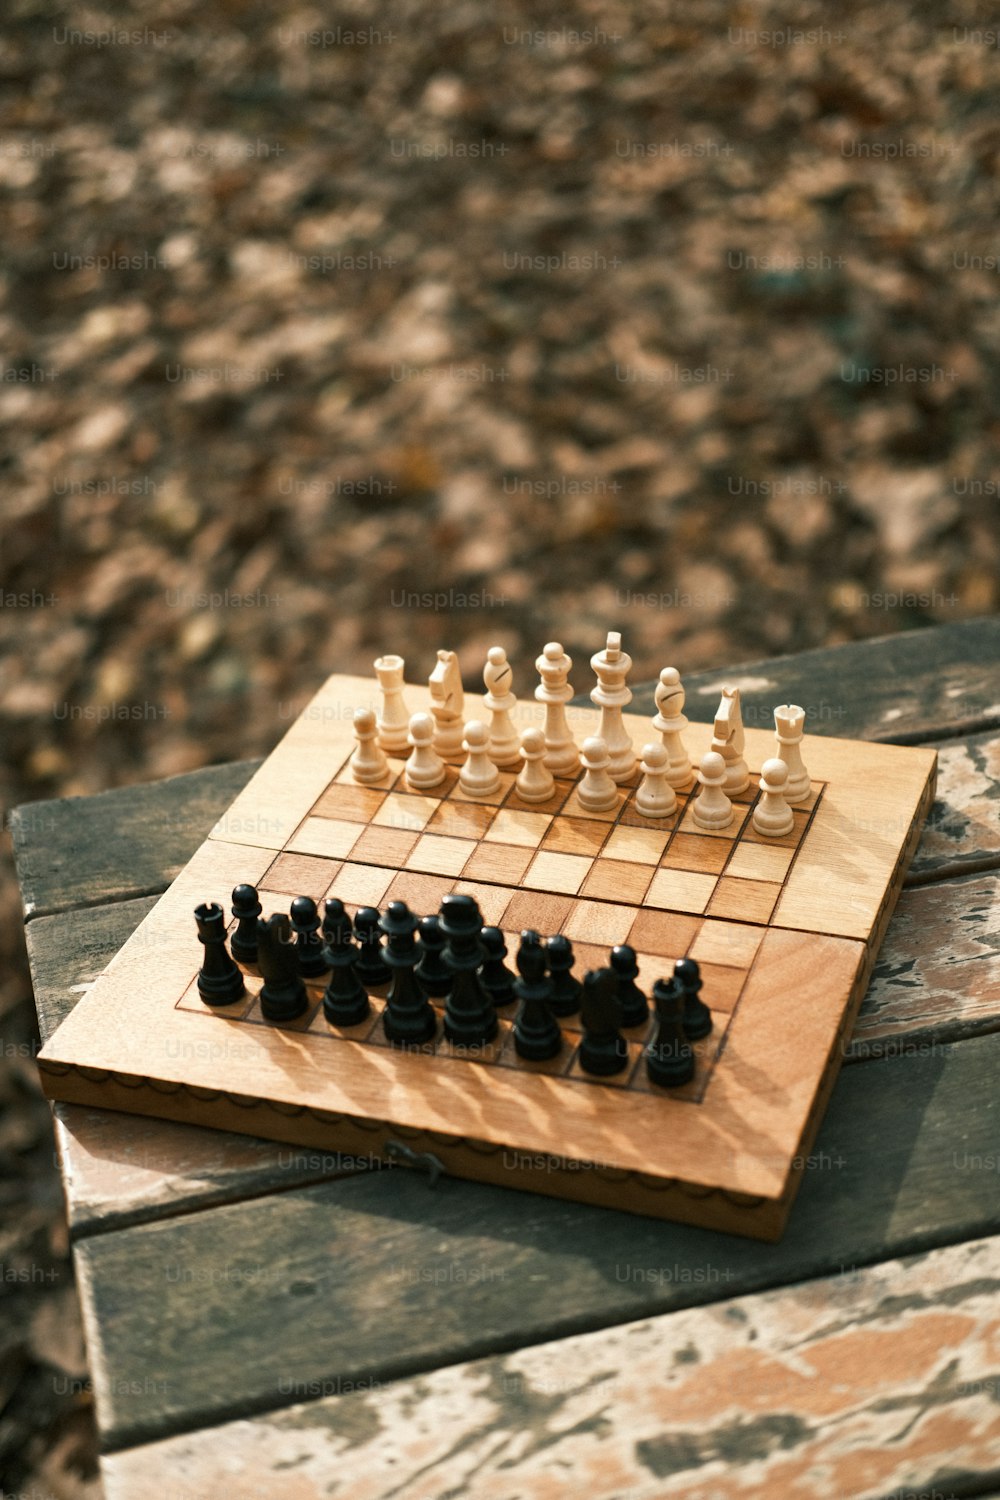 Checkmate Black Queen Takes Out White King To Win Match Stock Photo -  Download Image Now - iStock